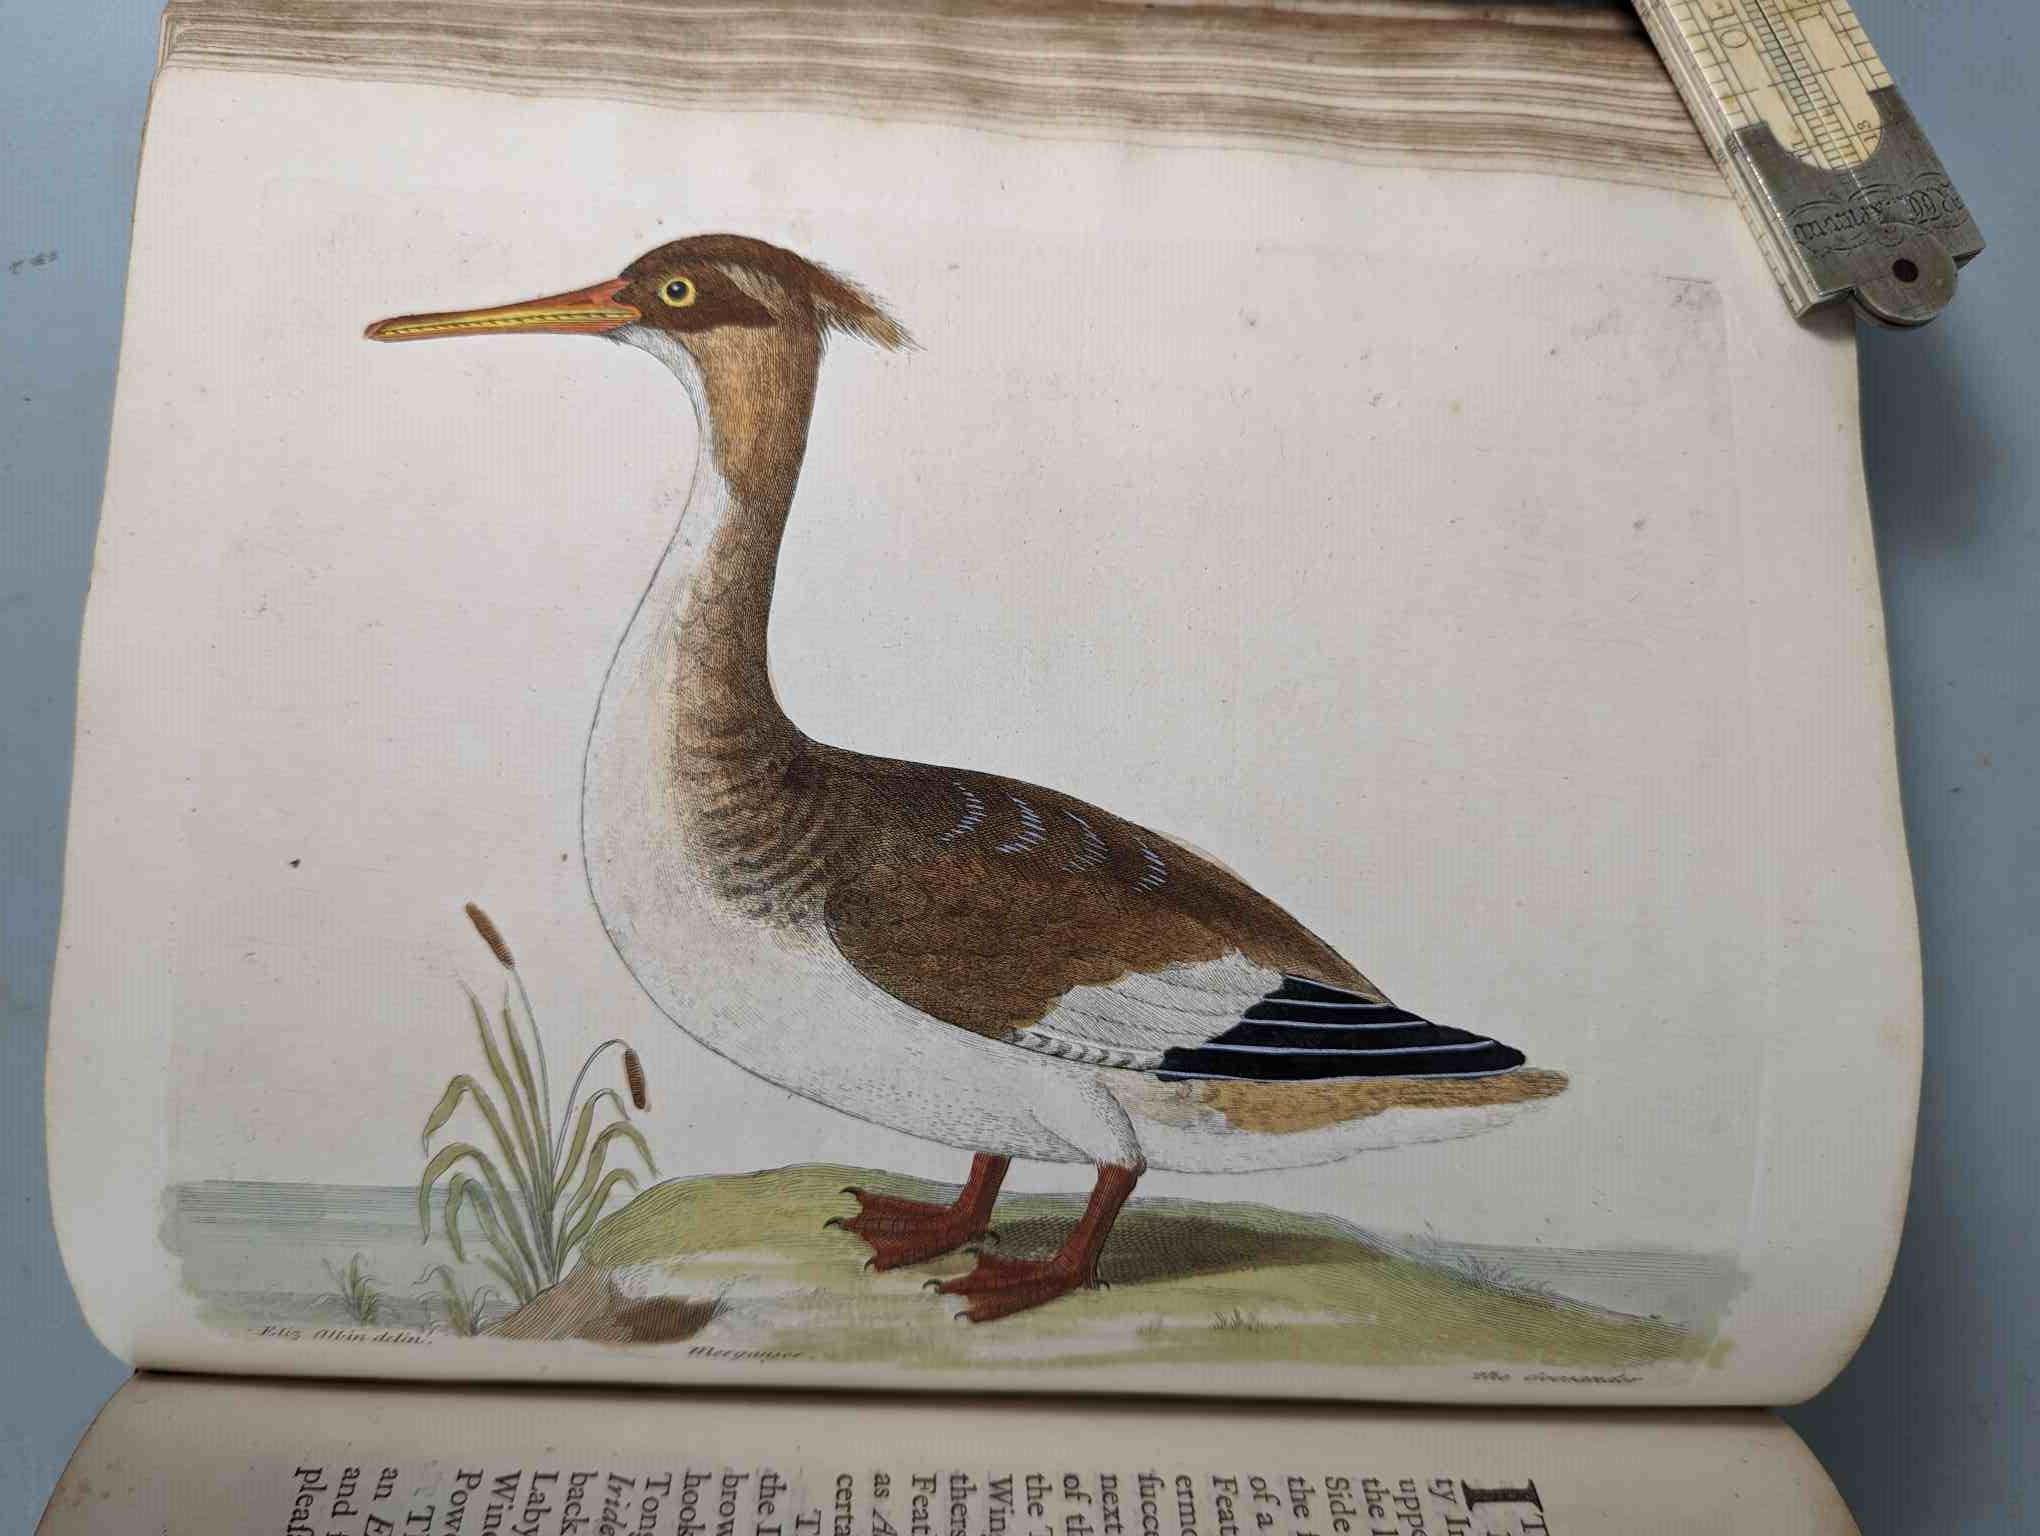 ALBIN, Eleazar. A Natural History of Birds, to which are added, Notes and Observations by W. - Image 90 of 208